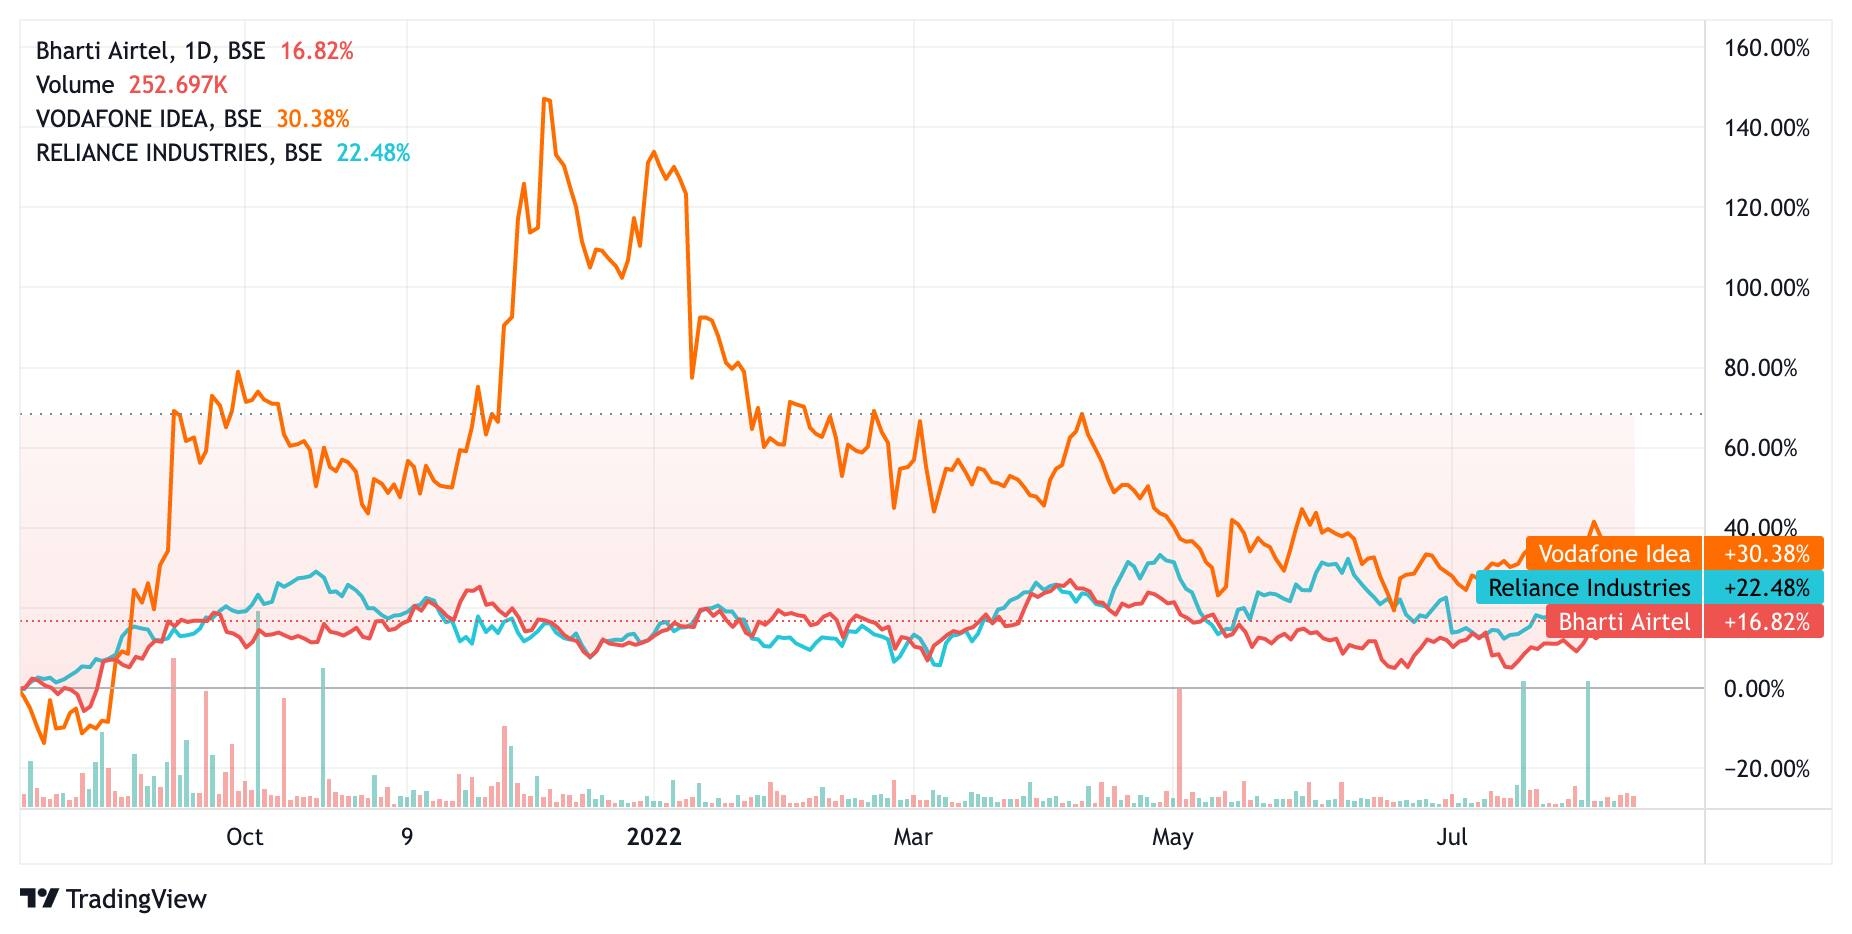 Telecom price chart from Airtel, Vodafone Idea and Reliance Industries.